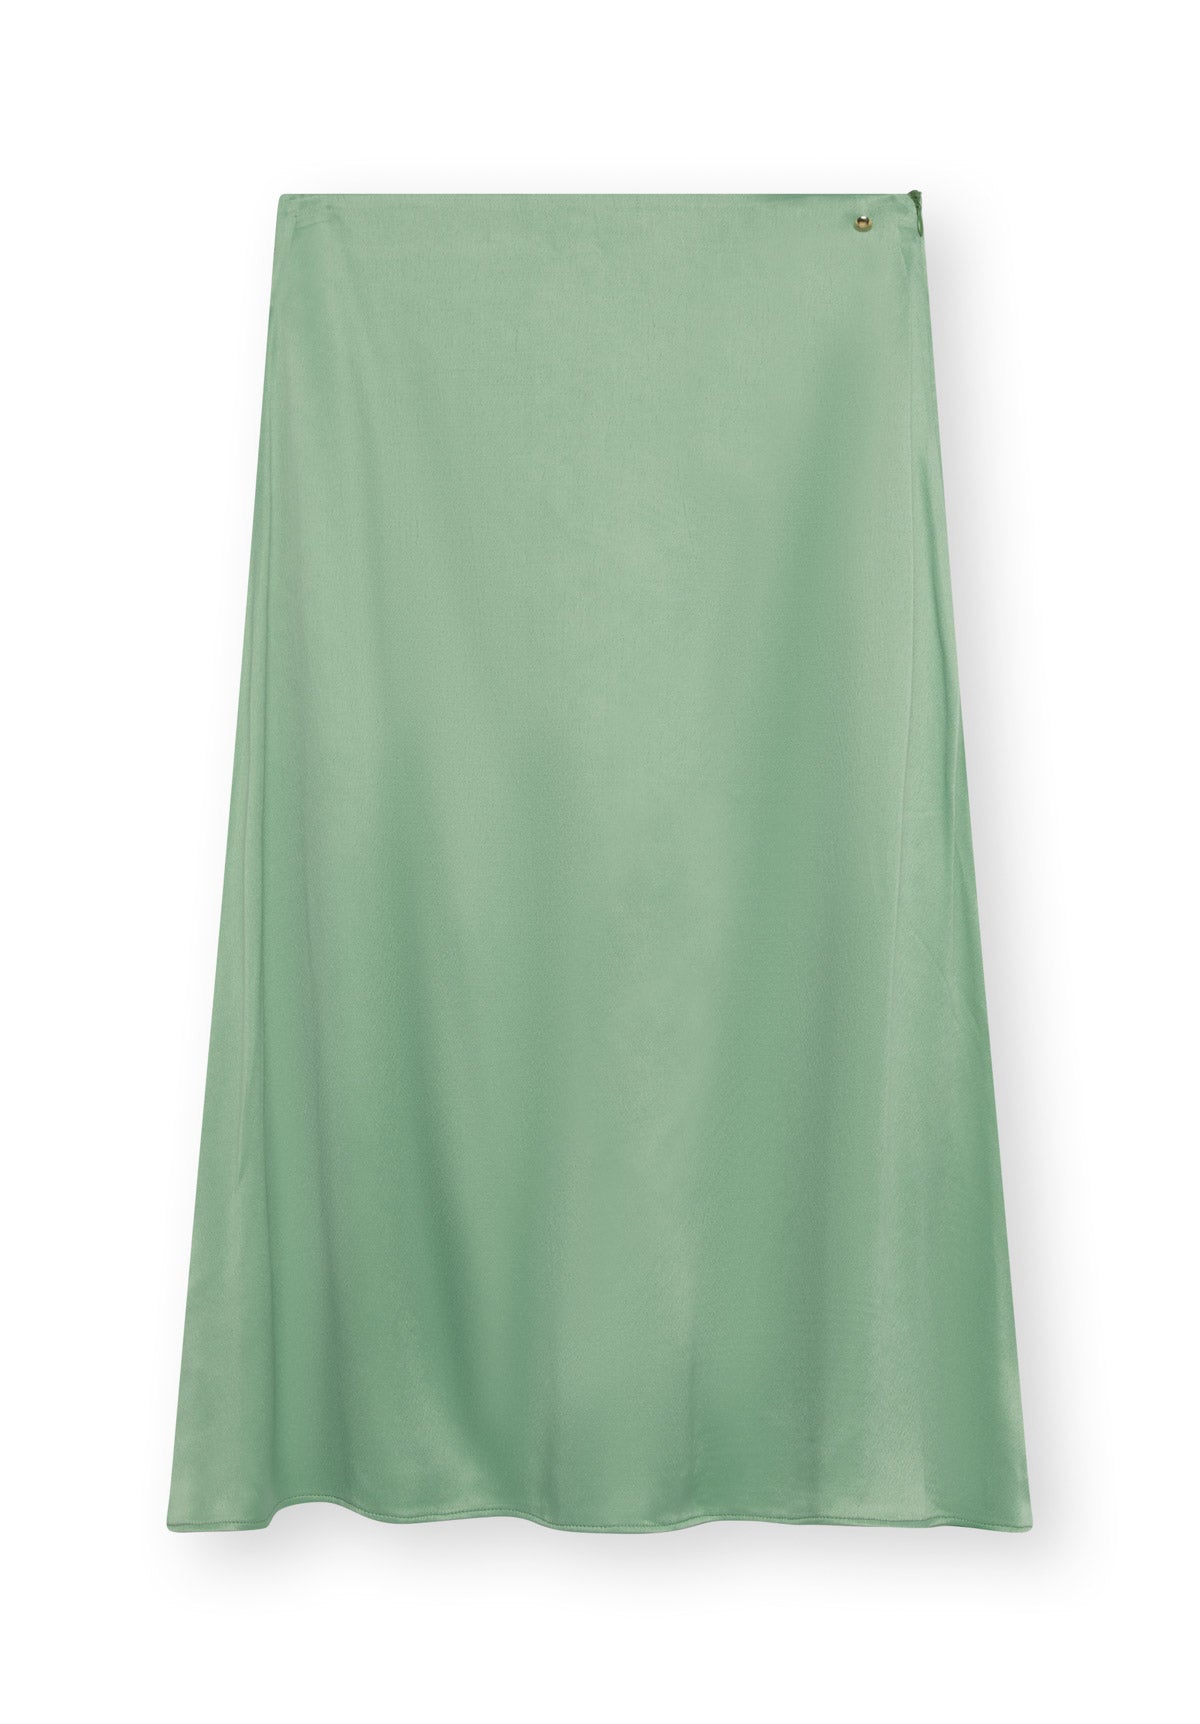 Jupe LEONNE in Mild Green by LOVJOI made from sustainable ENKA® viscose and Ecovero™